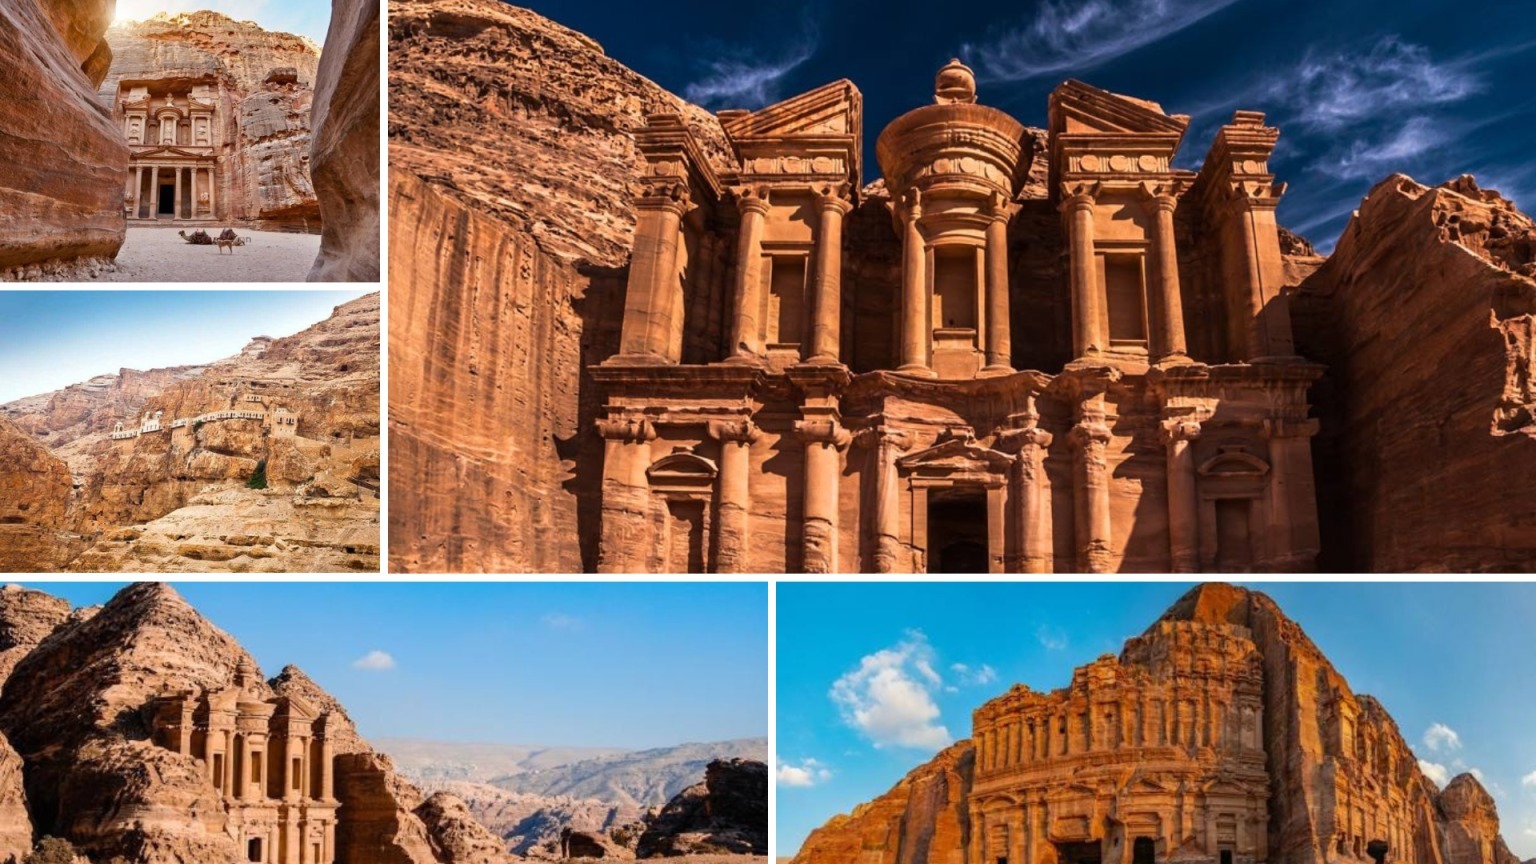 Petra, Jordan: Gorgeous Rose-Red City and Wonder of the World